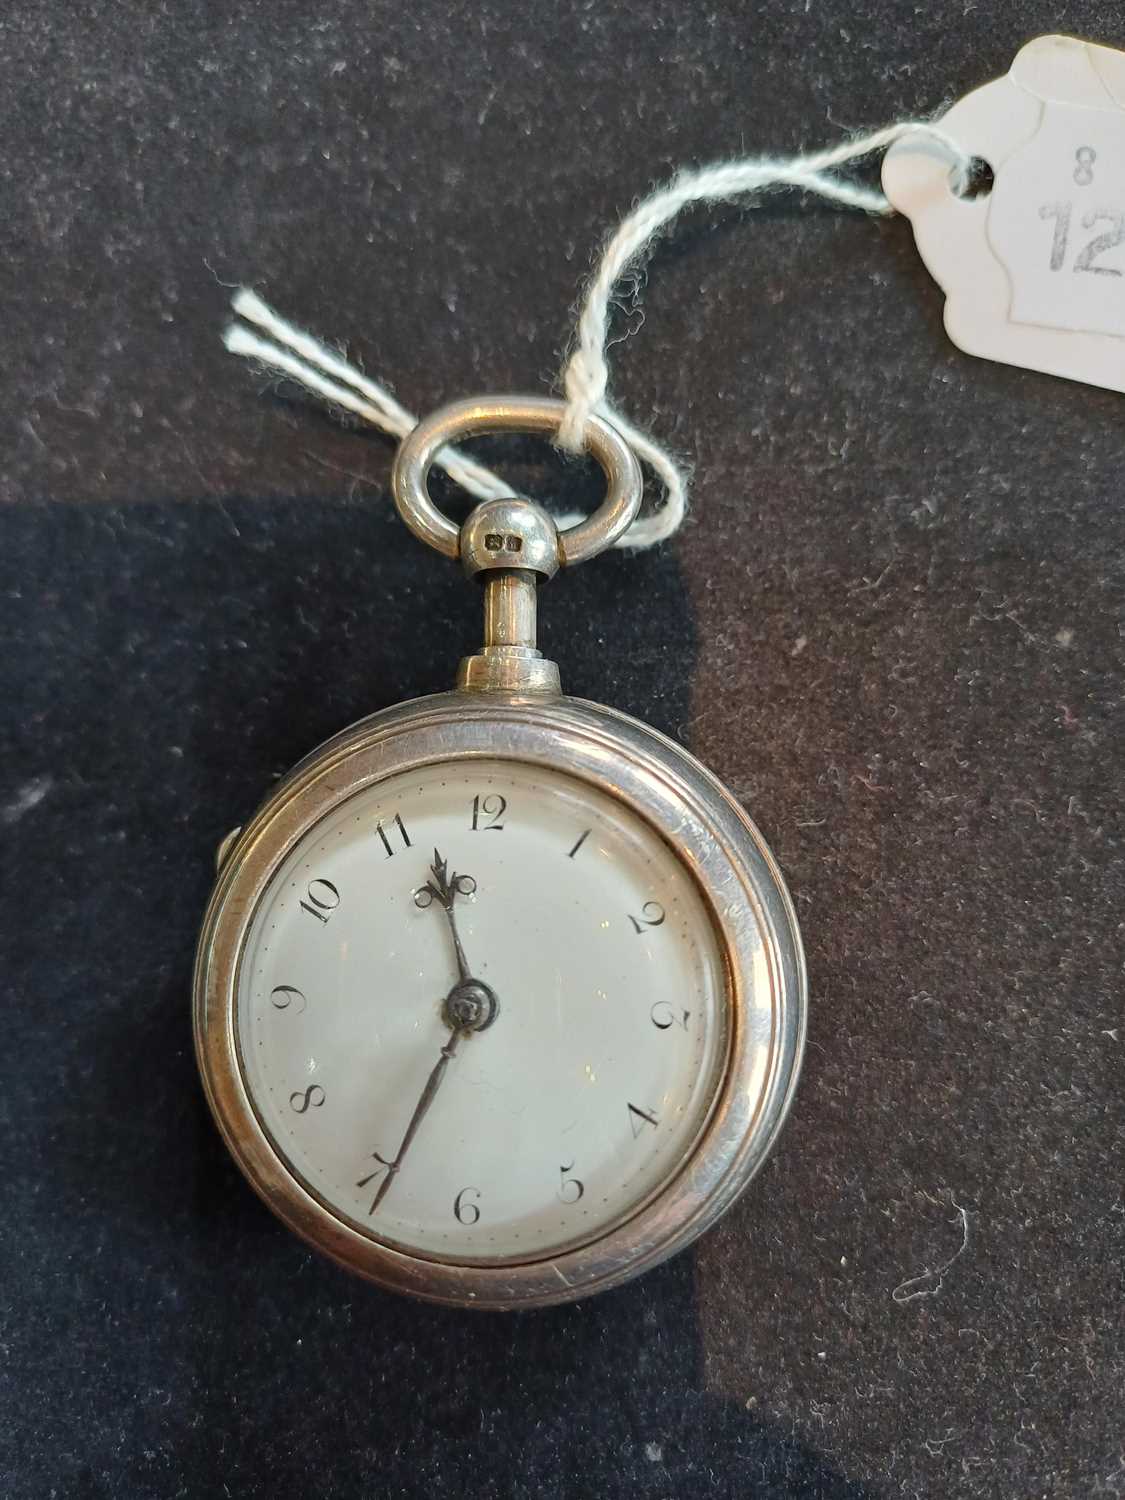 A Pair Cased Verge Repeater Pocket Watch, signed Jno Kentish, London, fusee verge movement signed, - Image 2 of 6